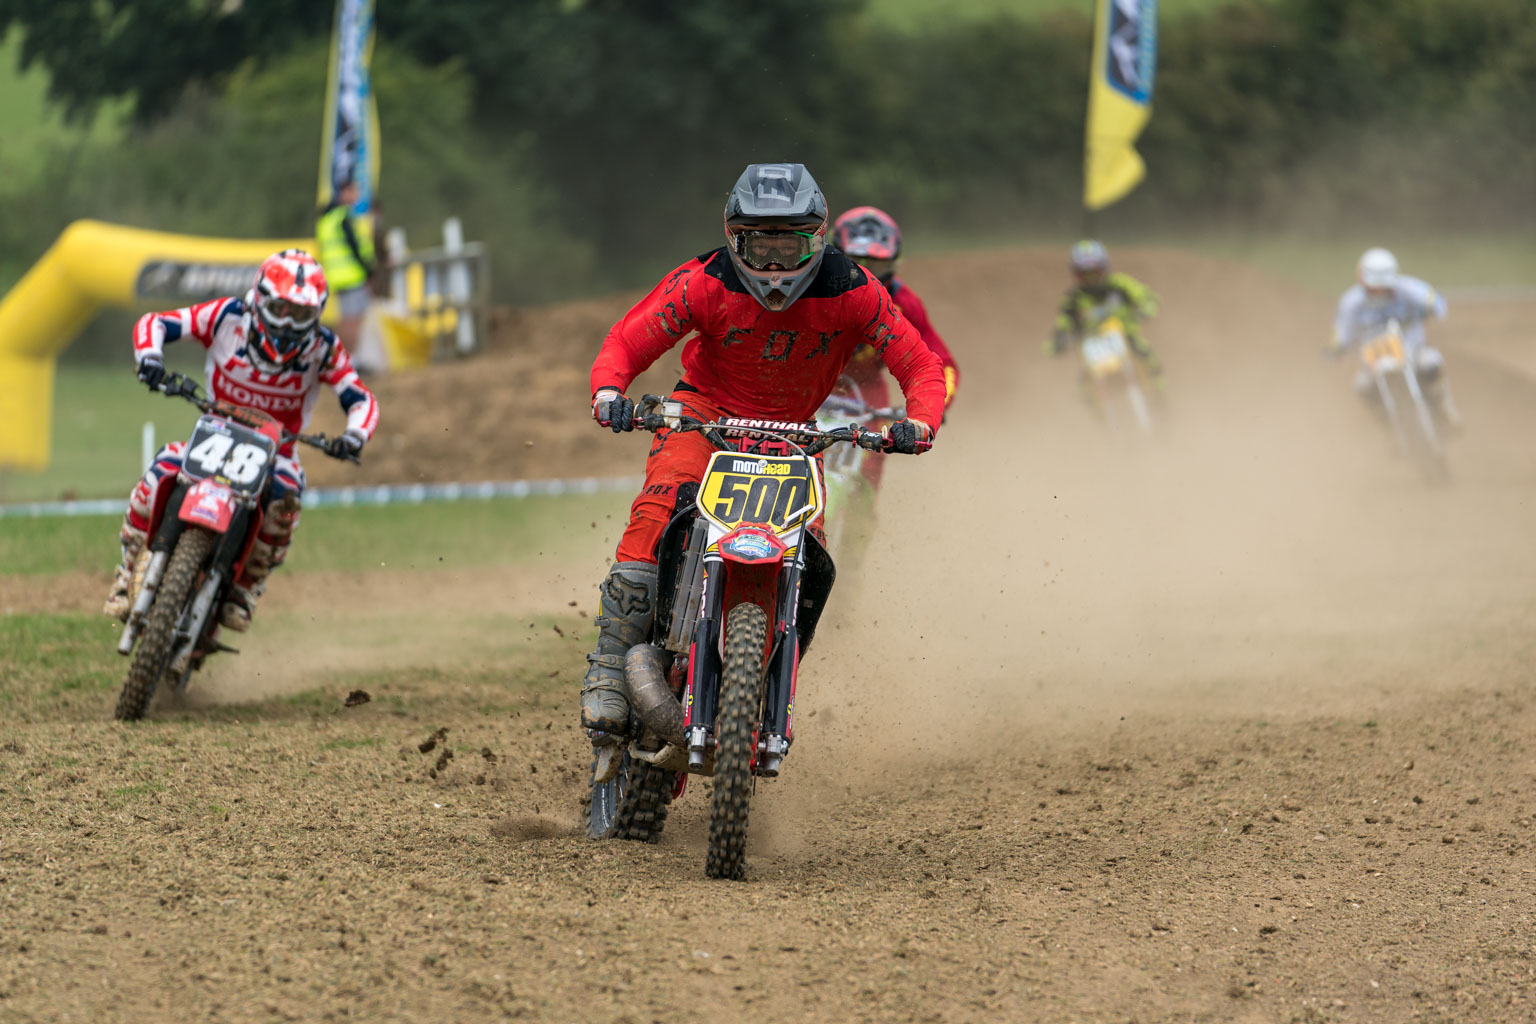 Ryan George took second in the SuperEvo class